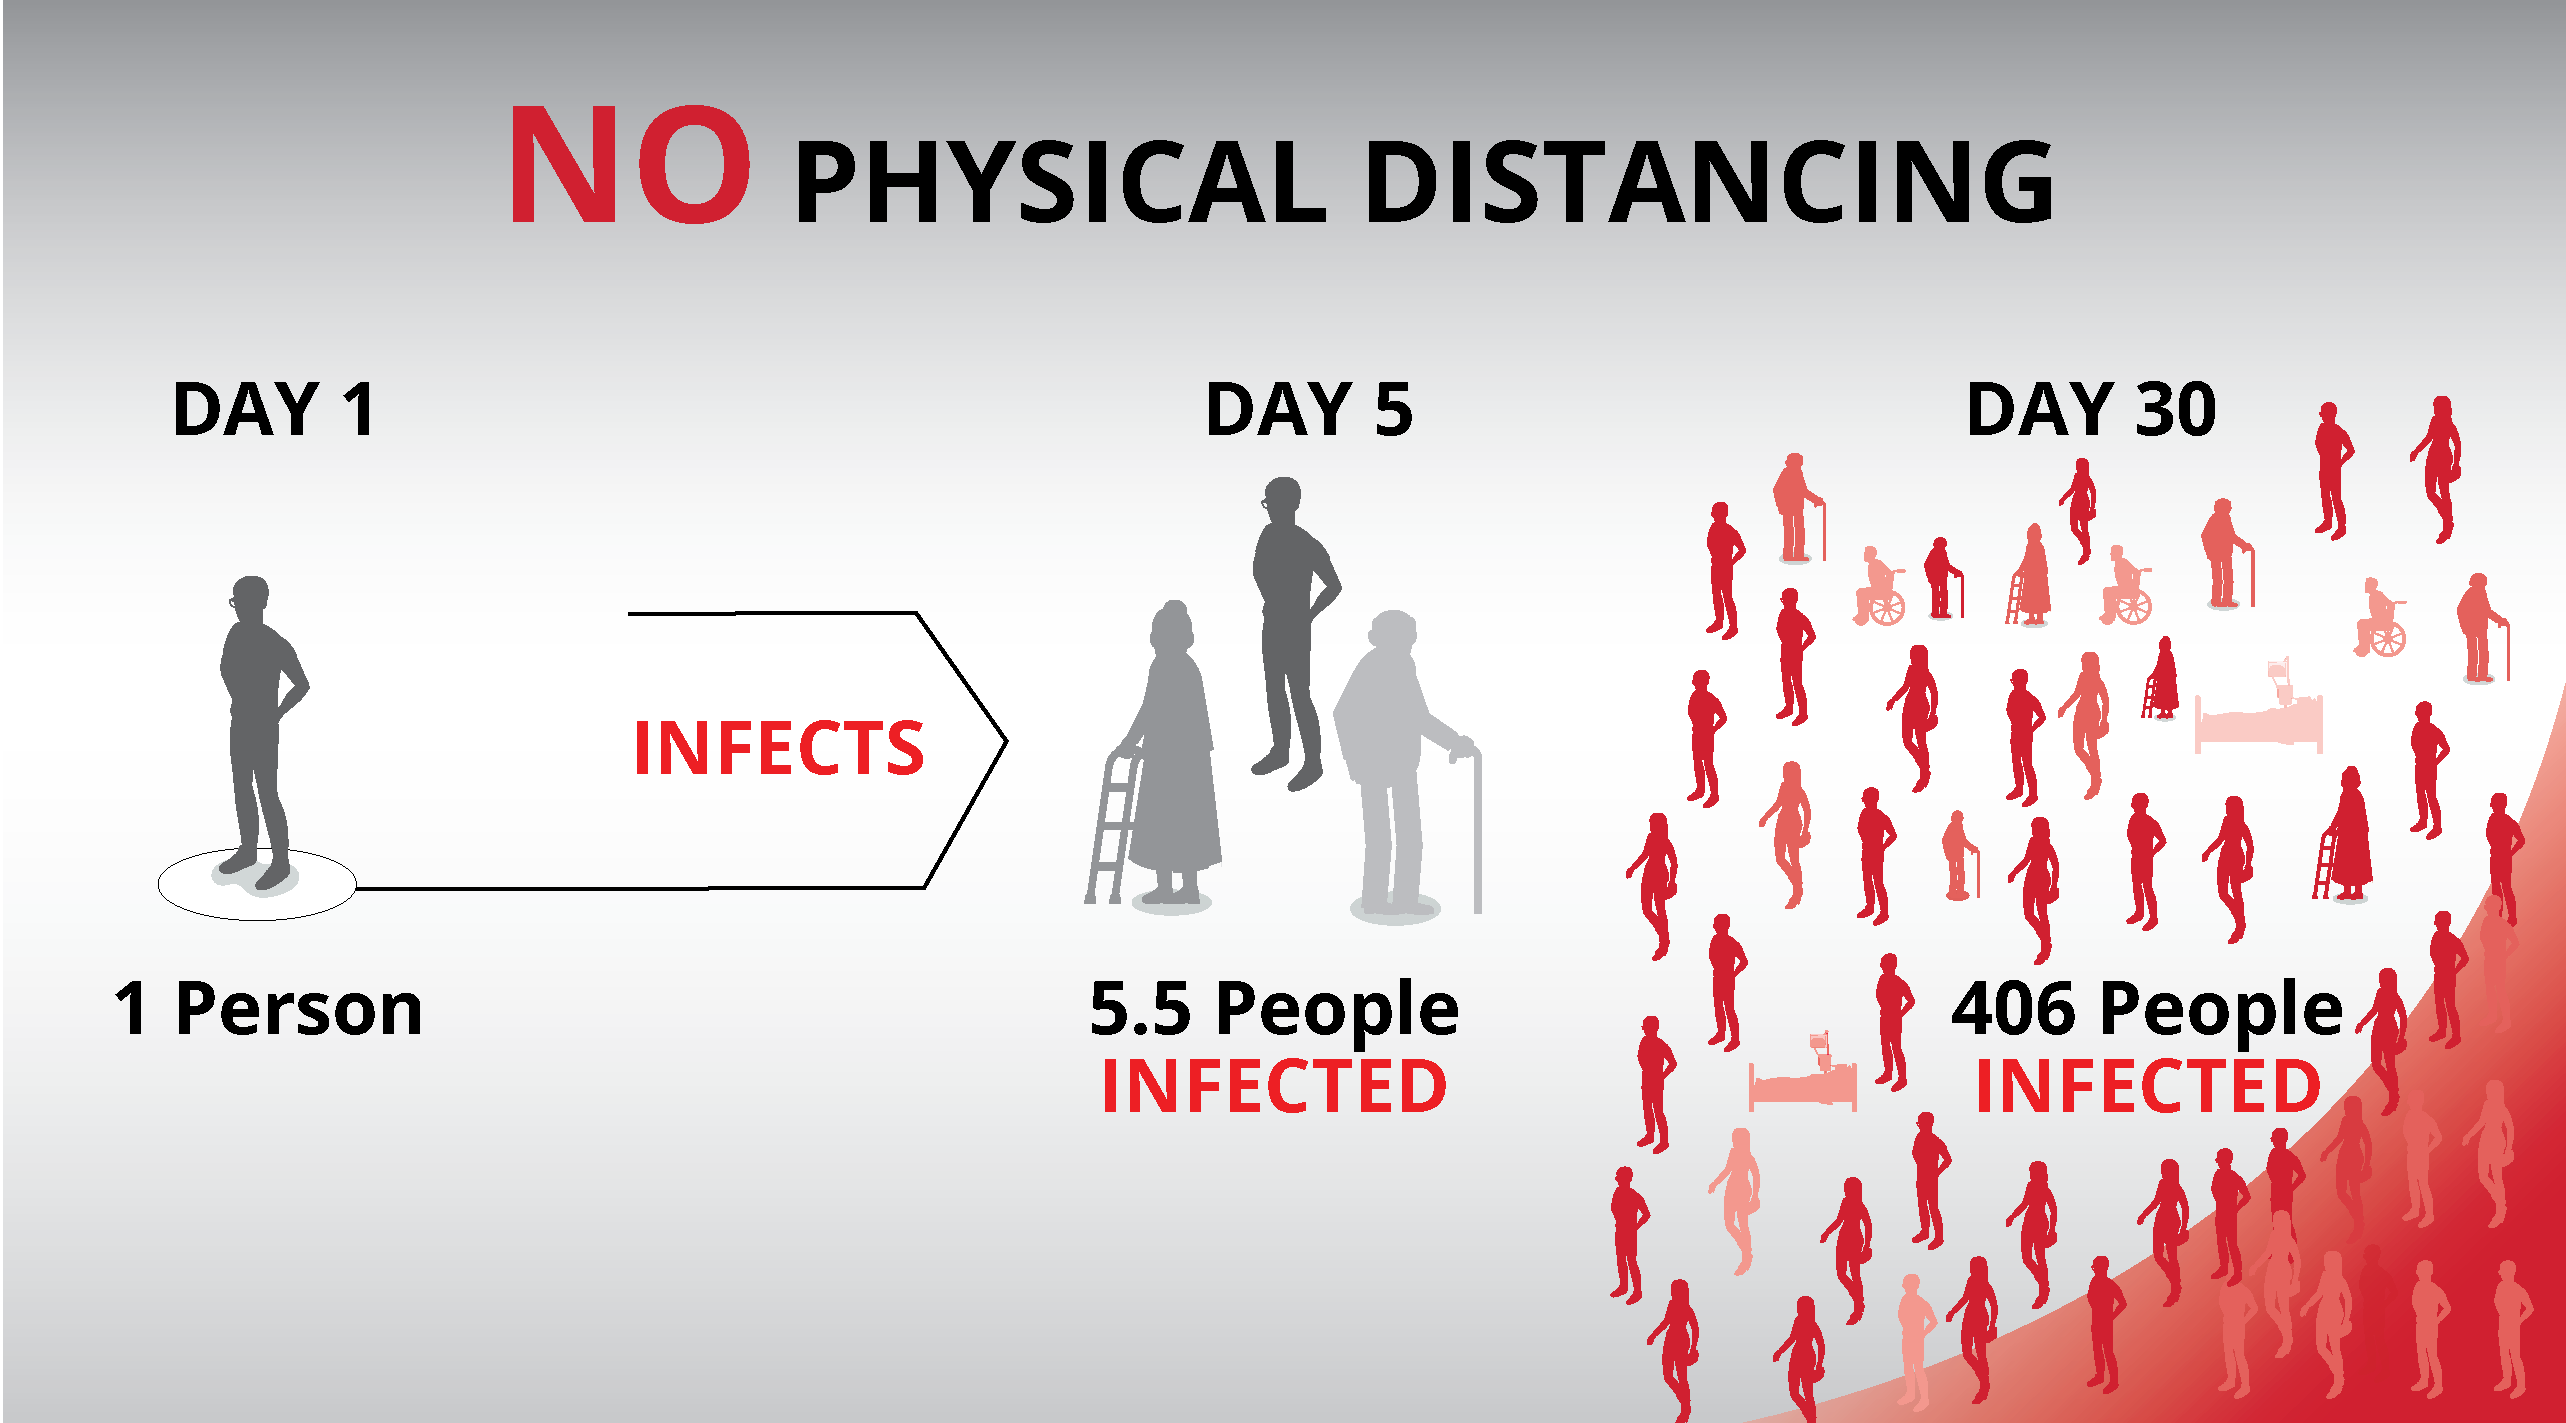 No reduction in physical distanicng. One person infects 5.5 people on day 5 and 406 people on day 30